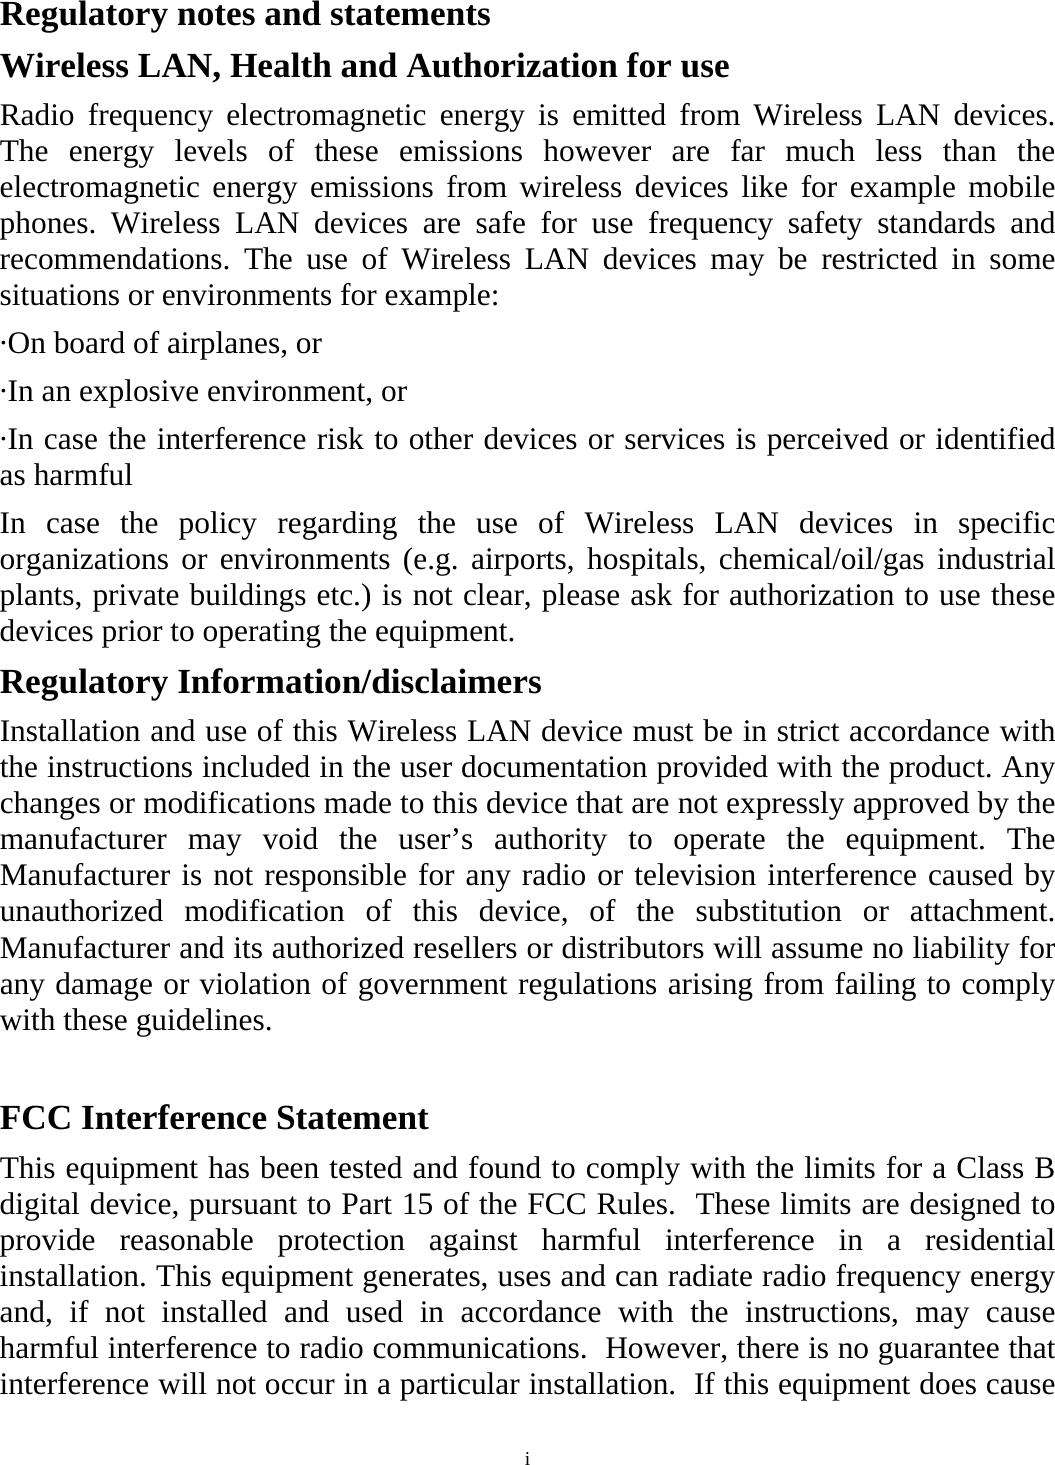 i Regulatory notes and statements Wireless LAN, Health and Authorization for use Radio frequency electromagnetic energy is emitted from Wireless LAN devices. The energy levels of these emissions however are far much less than the electromagnetic energy emissions from wireless devices like for example mobile phones. Wireless LAN devices are safe for use frequency safety standards and recommendations. The use of Wireless LAN devices may be restricted in some situations or environments for example: ·On board of airplanes, or ·In an explosive environment, or ·In case the interference risk to other devices or services is perceived or identified as harmful In case the policy regarding the use of Wireless LAN devices in specific organizations or environments (e.g. airports, hospitals, chemical/oil/gas industrial plants, private buildings etc.) is not clear, please ask for authorization to use these devices prior to operating the equipment. Regulatory Information/disclaimers Installation and use of this Wireless LAN device must be in strict accordance with the instructions included in the user documentation provided with the product. Any changes or modifications made to this device that are not expressly approved by the manufacturer may void the user’s authority to operate the equipment. The Manufacturer is not responsible for any radio or television interference caused by unauthorized modification of this device, of the substitution or attachment. Manufacturer and its authorized resellers or distributors will assume no liability for any damage or violation of government regulations arising from failing to comply with these guidelines.  FCC Interference Statement This equipment has been tested and found to comply with the limits for a Class B digital device, pursuant to Part 15 of the FCC Rules.  These limits are designed to provide reasonable protection against harmful interference in a residential installation. This equipment generates, uses and can radiate radio frequency energy and, if not installed and used in accordance with the instructions, may cause harmful interference to radio communications.  However, there is no guarantee that interference will not occur in a particular installation.  If this equipment does cause 